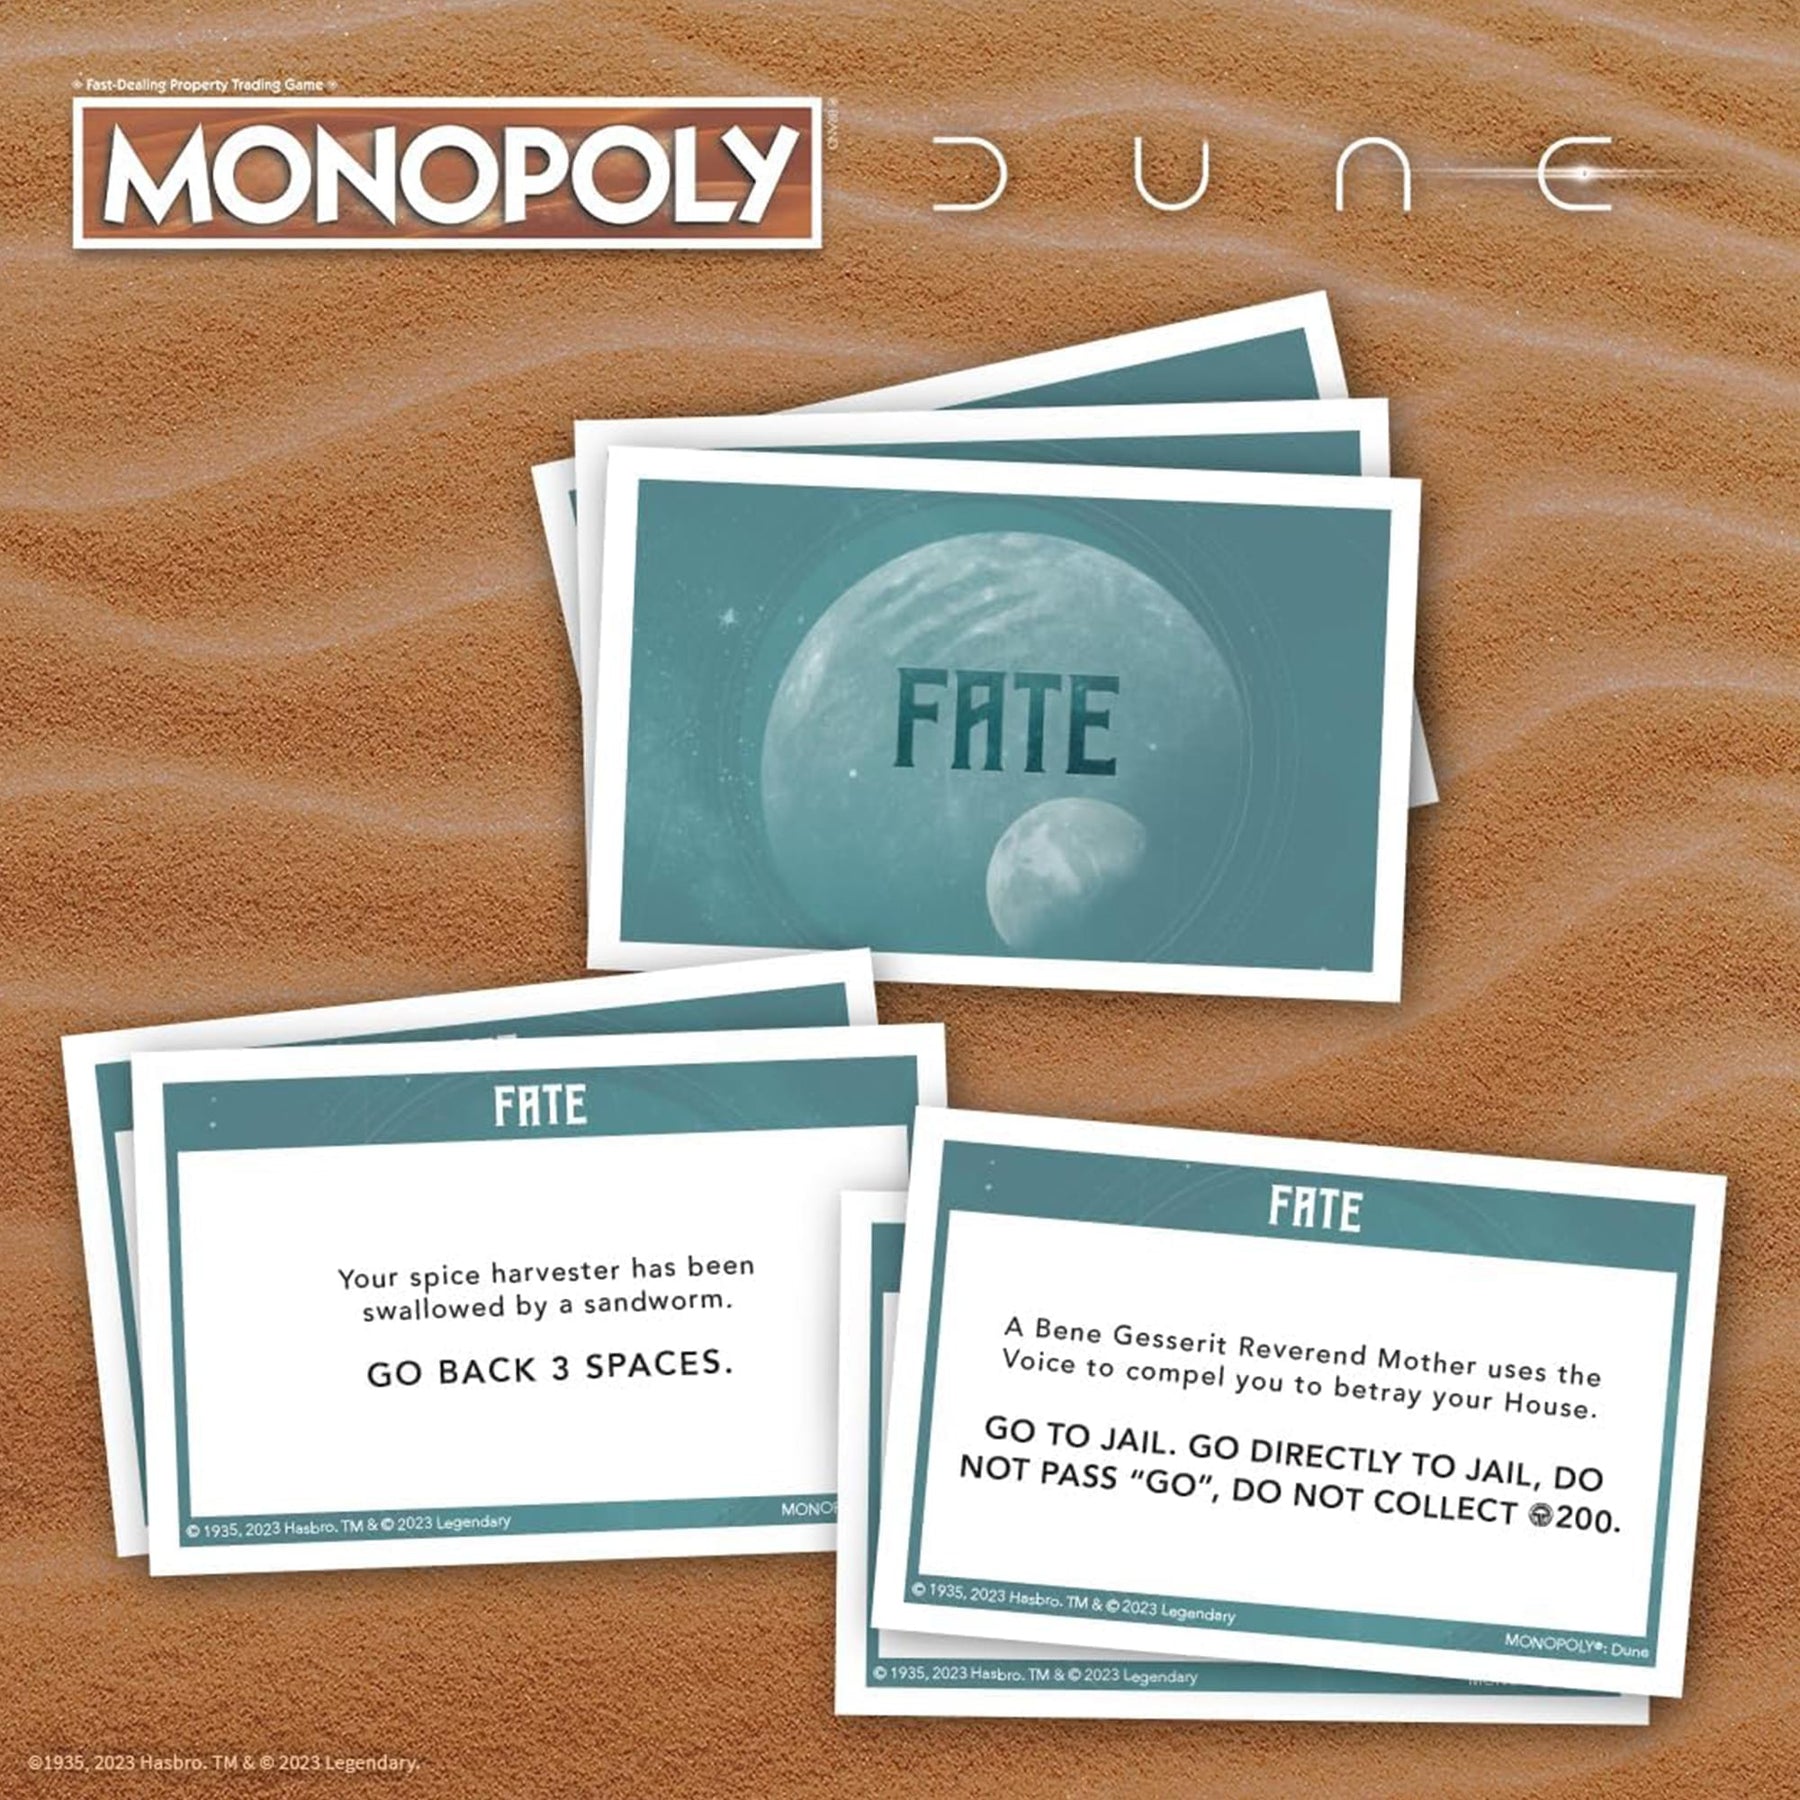 Dune Monopoly Board Game